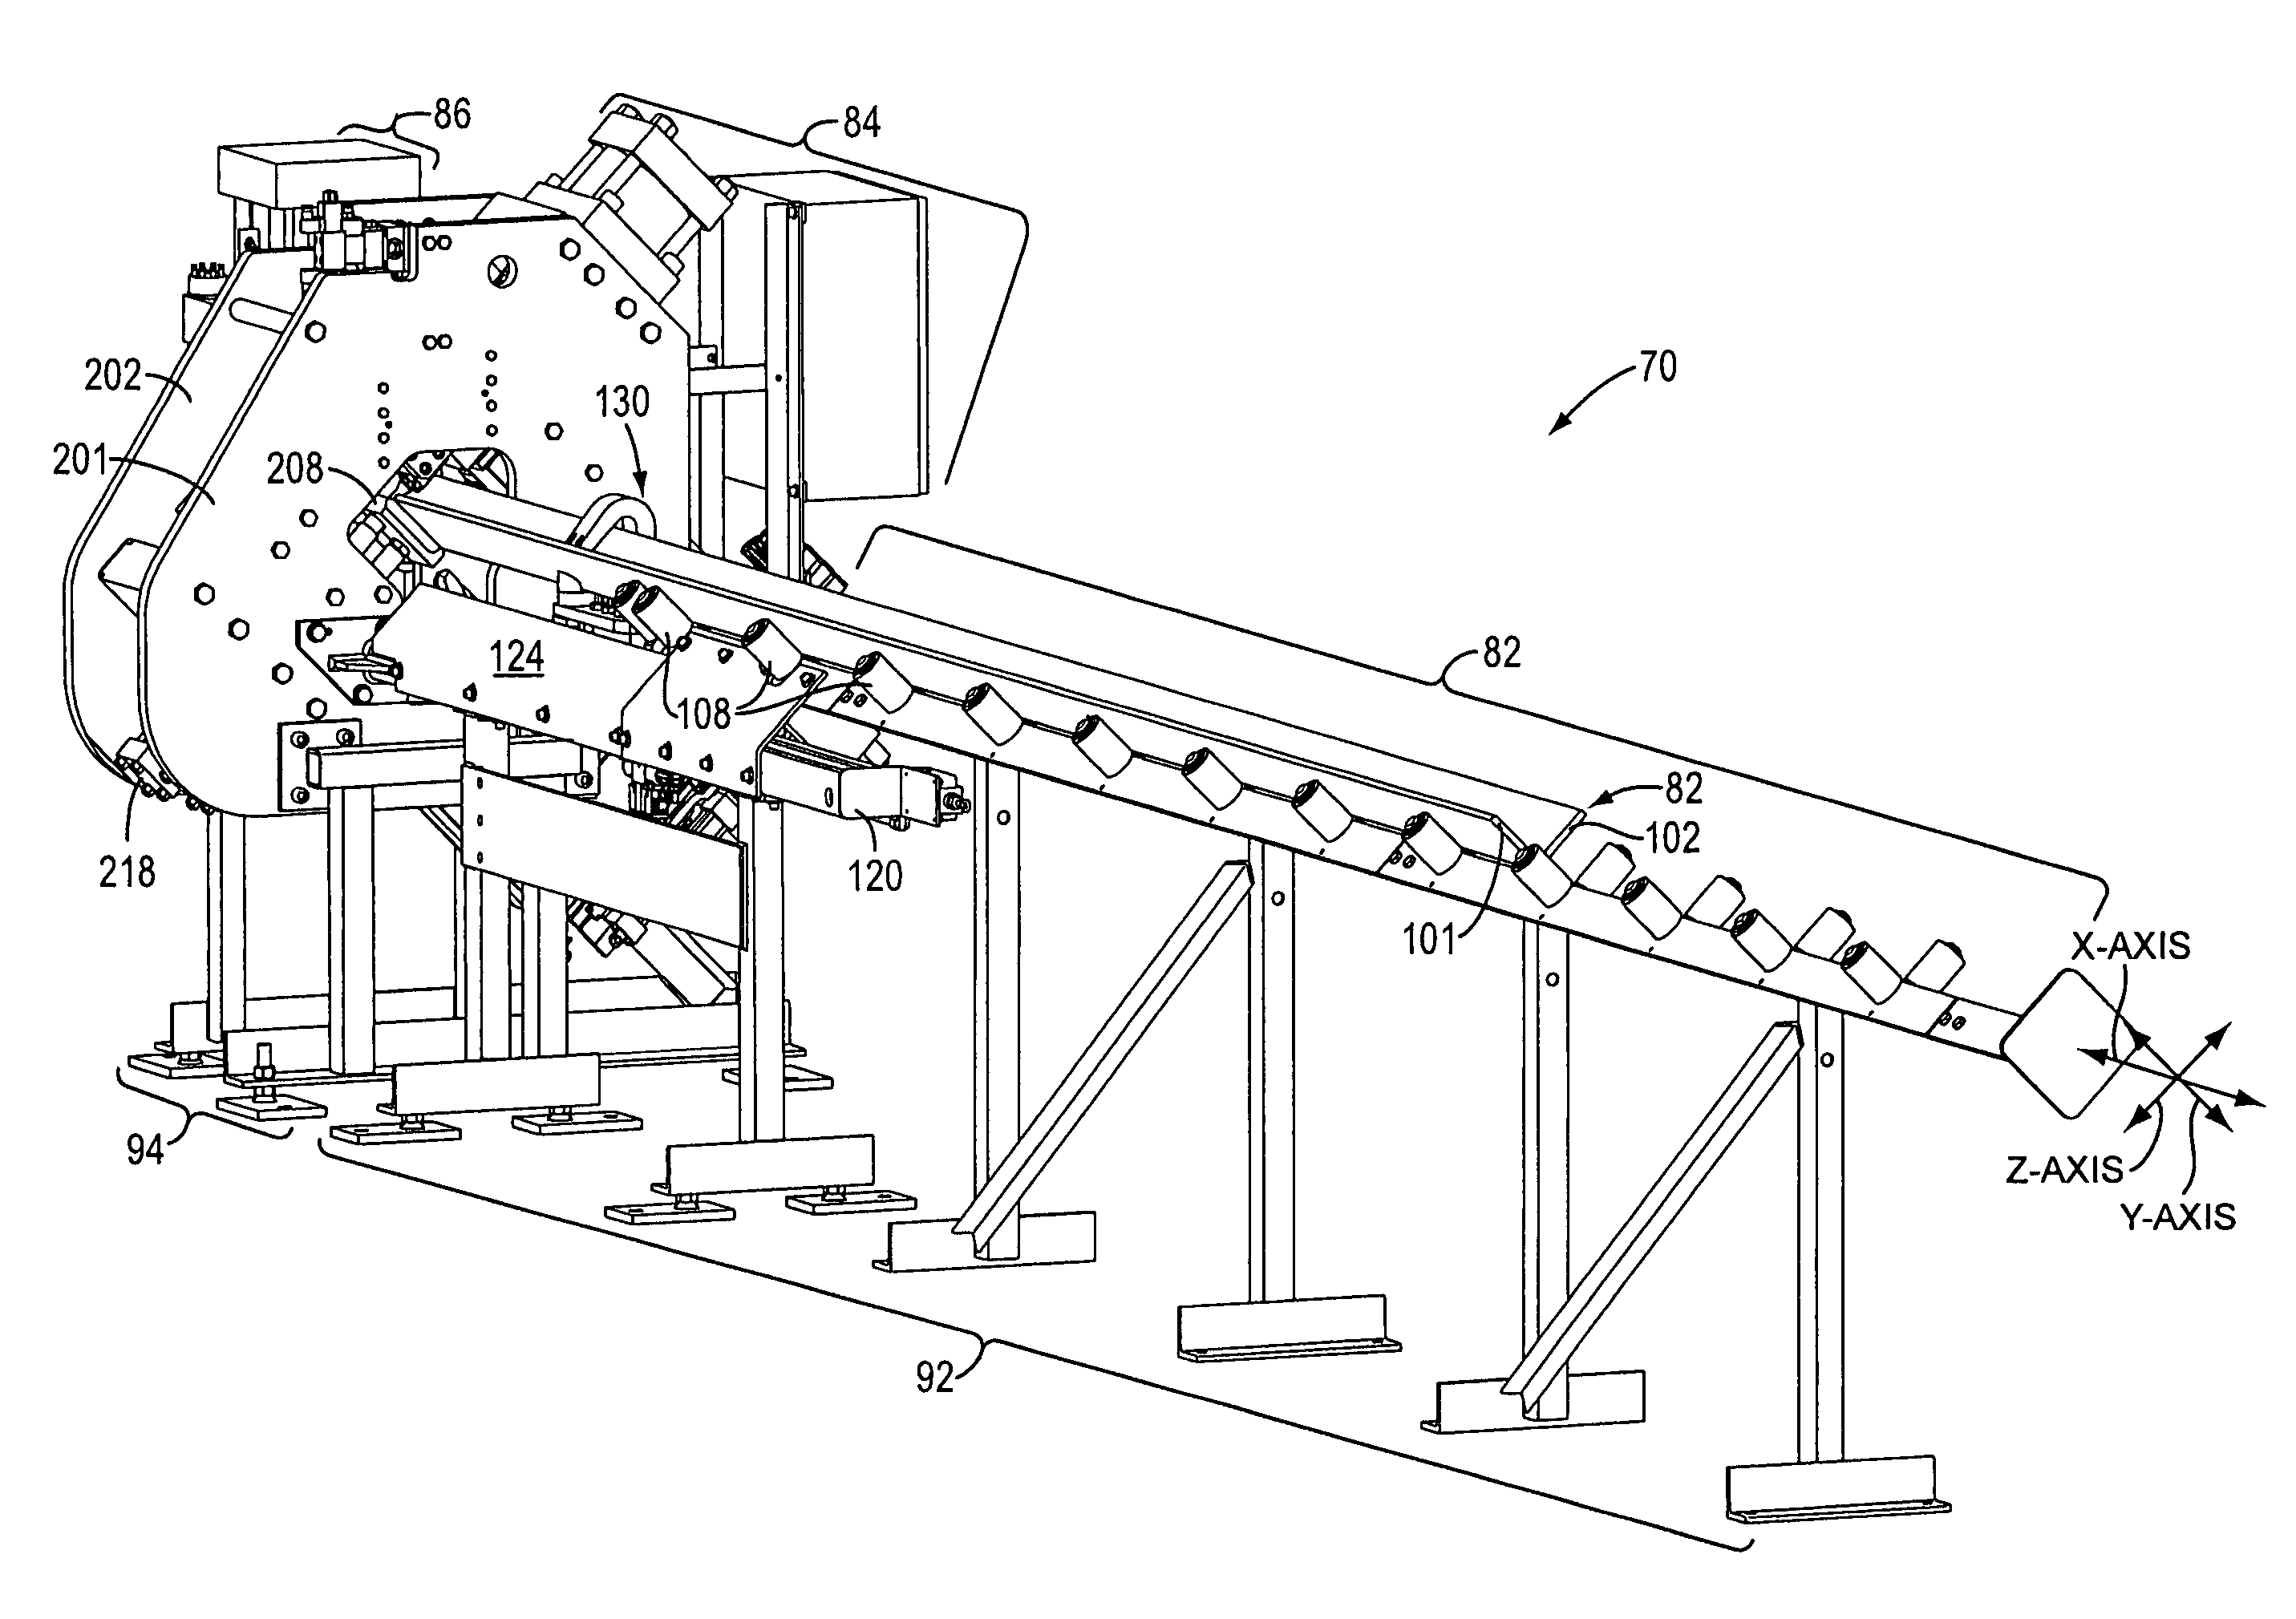 Punch and drill machine for a structural angle